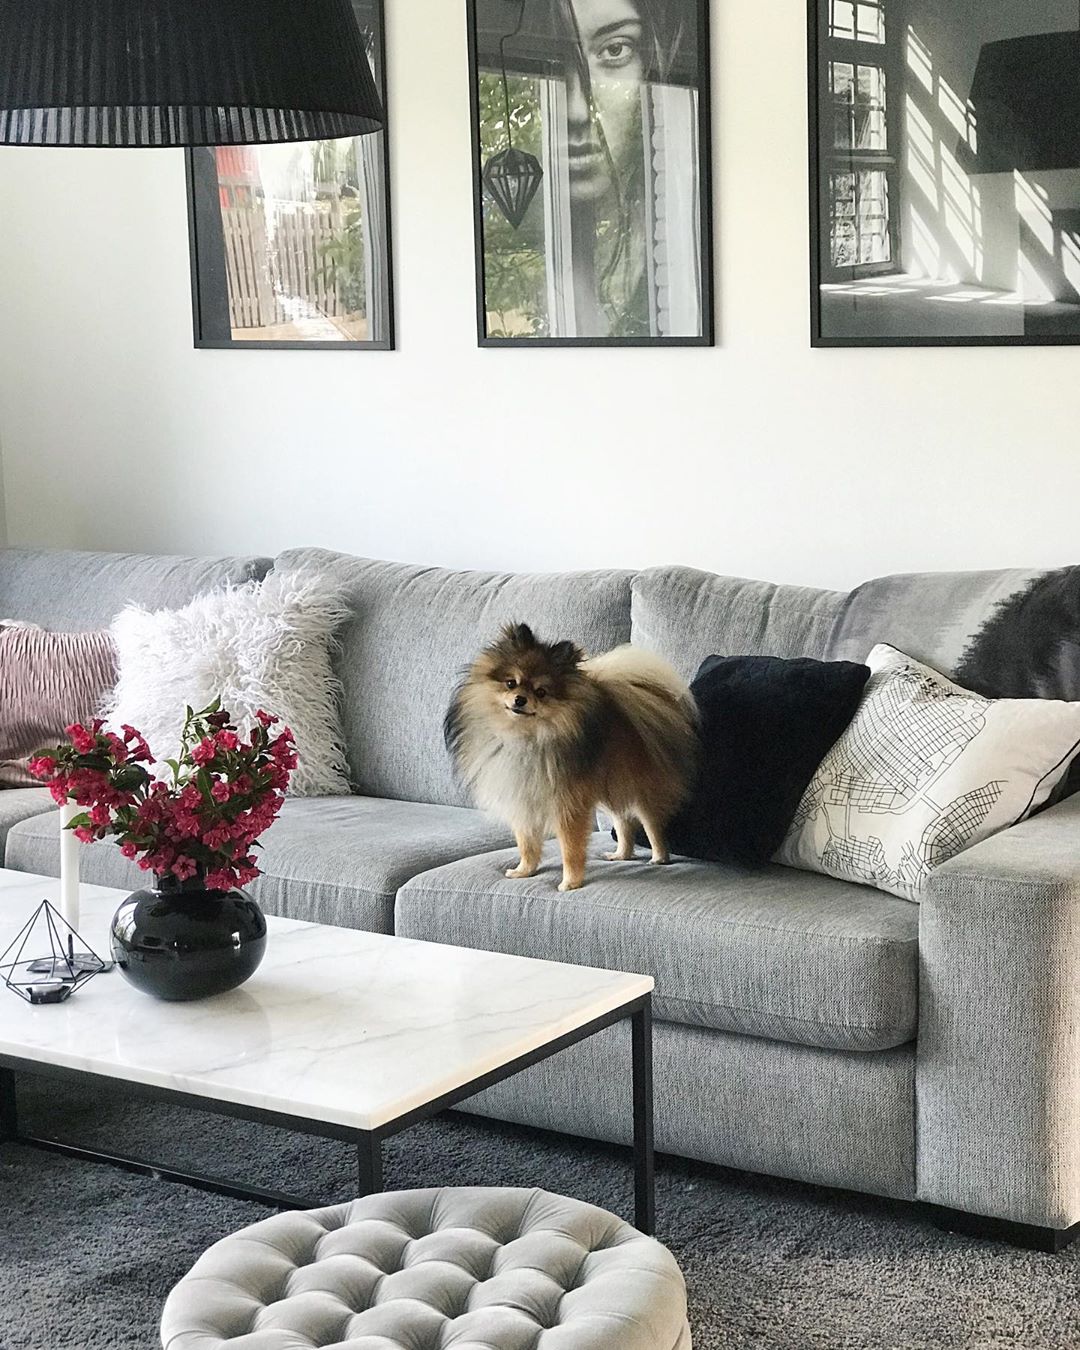 Pomeranian on living room couch. Photo by Instagram user @128.kvadrat